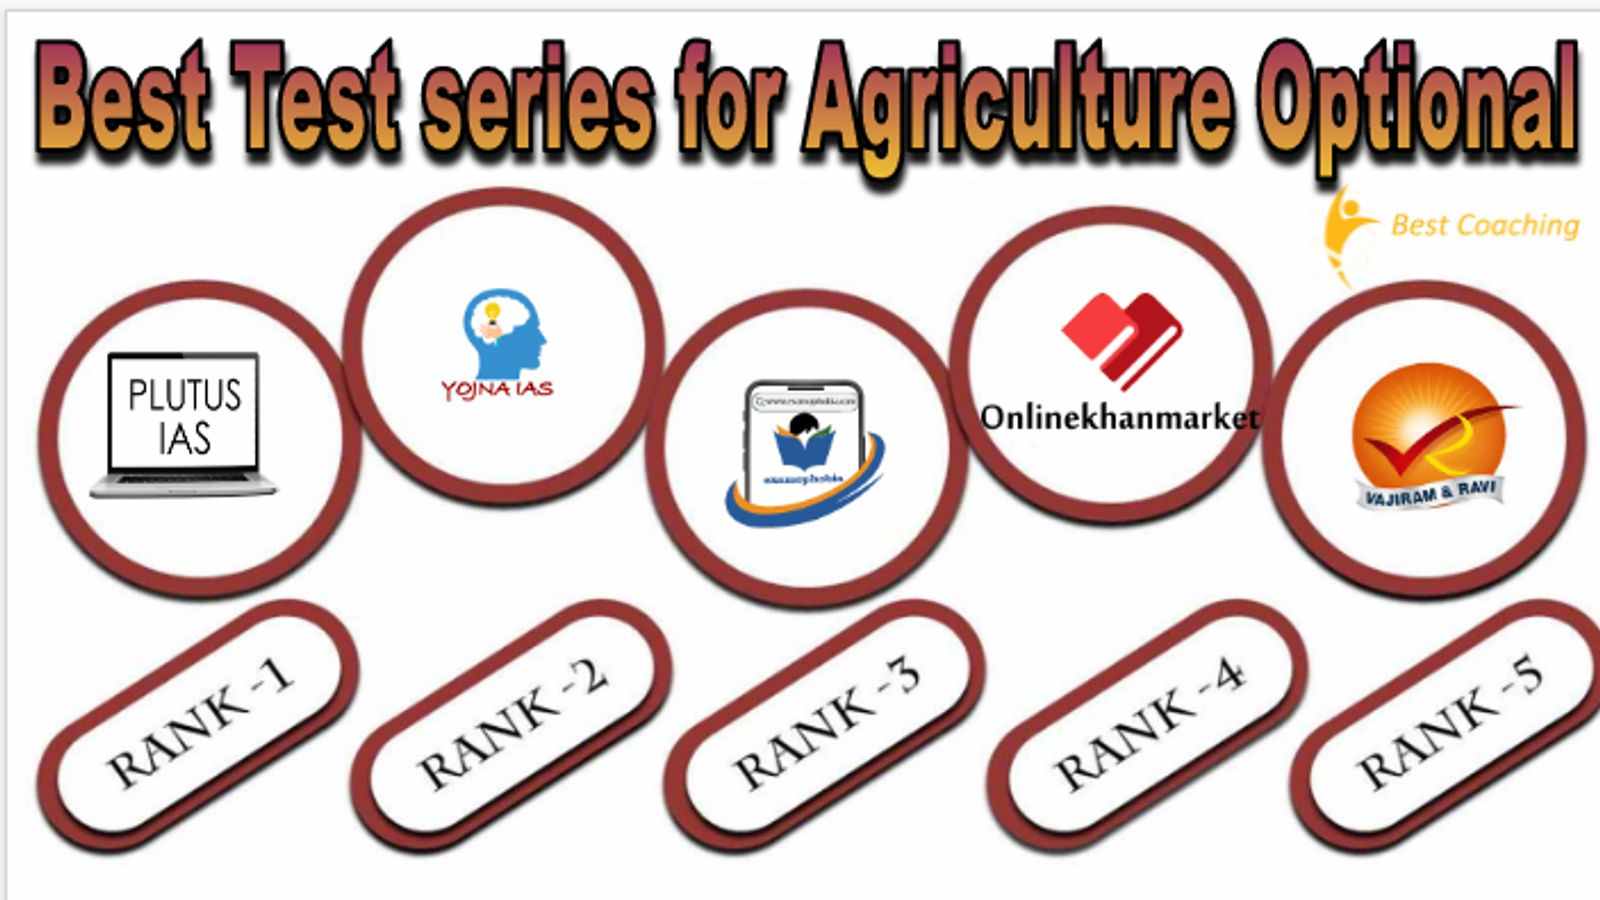 Best Test series for Agriculture Optional